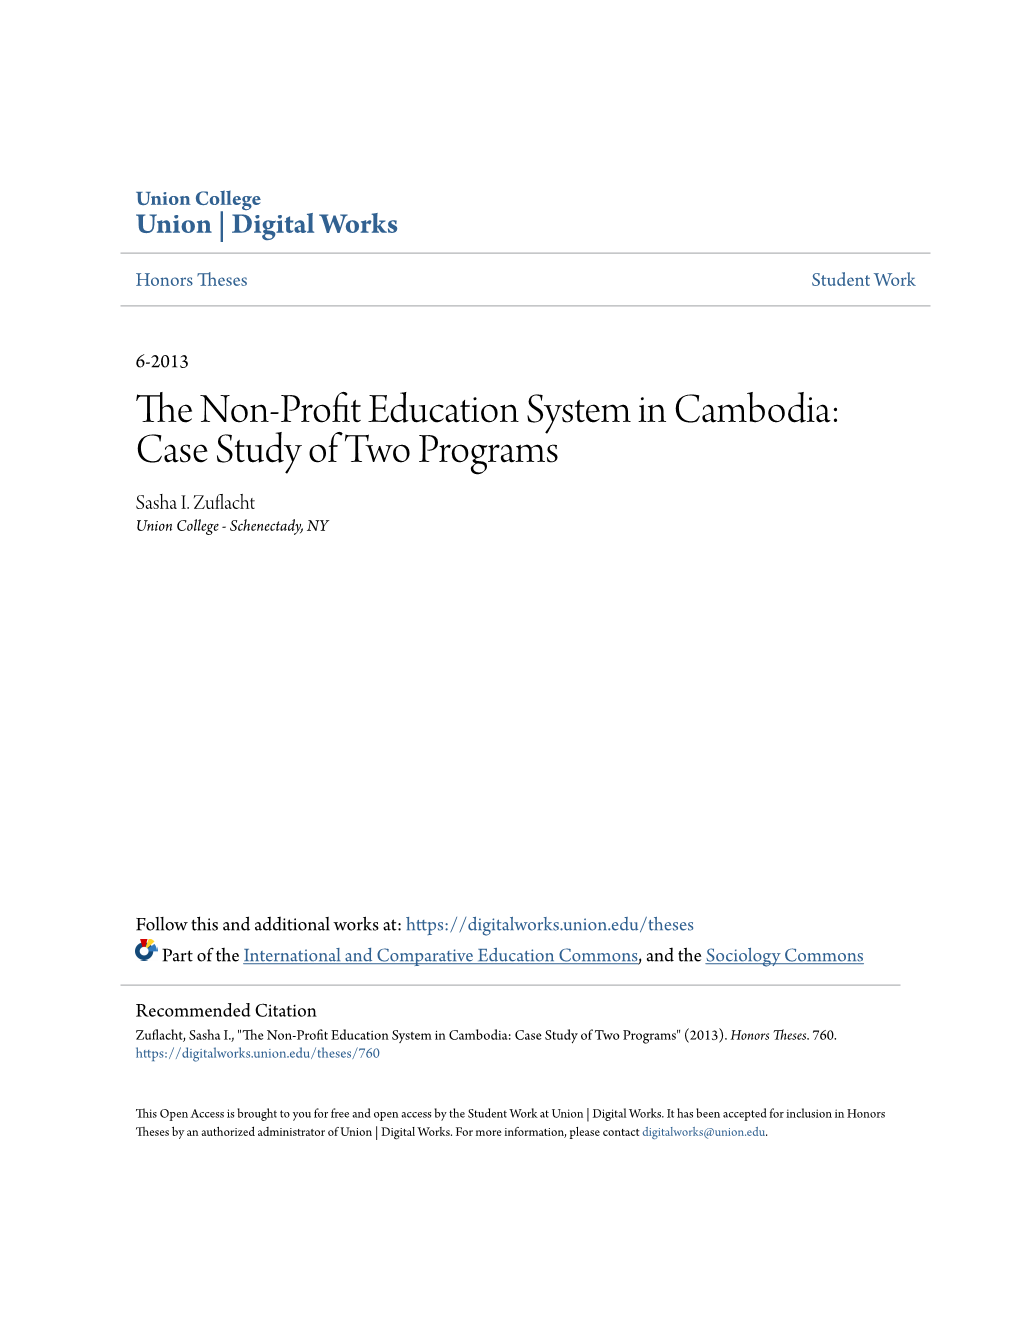 The Non-Profit Education System in Cambodia: Case Study of Two Programs